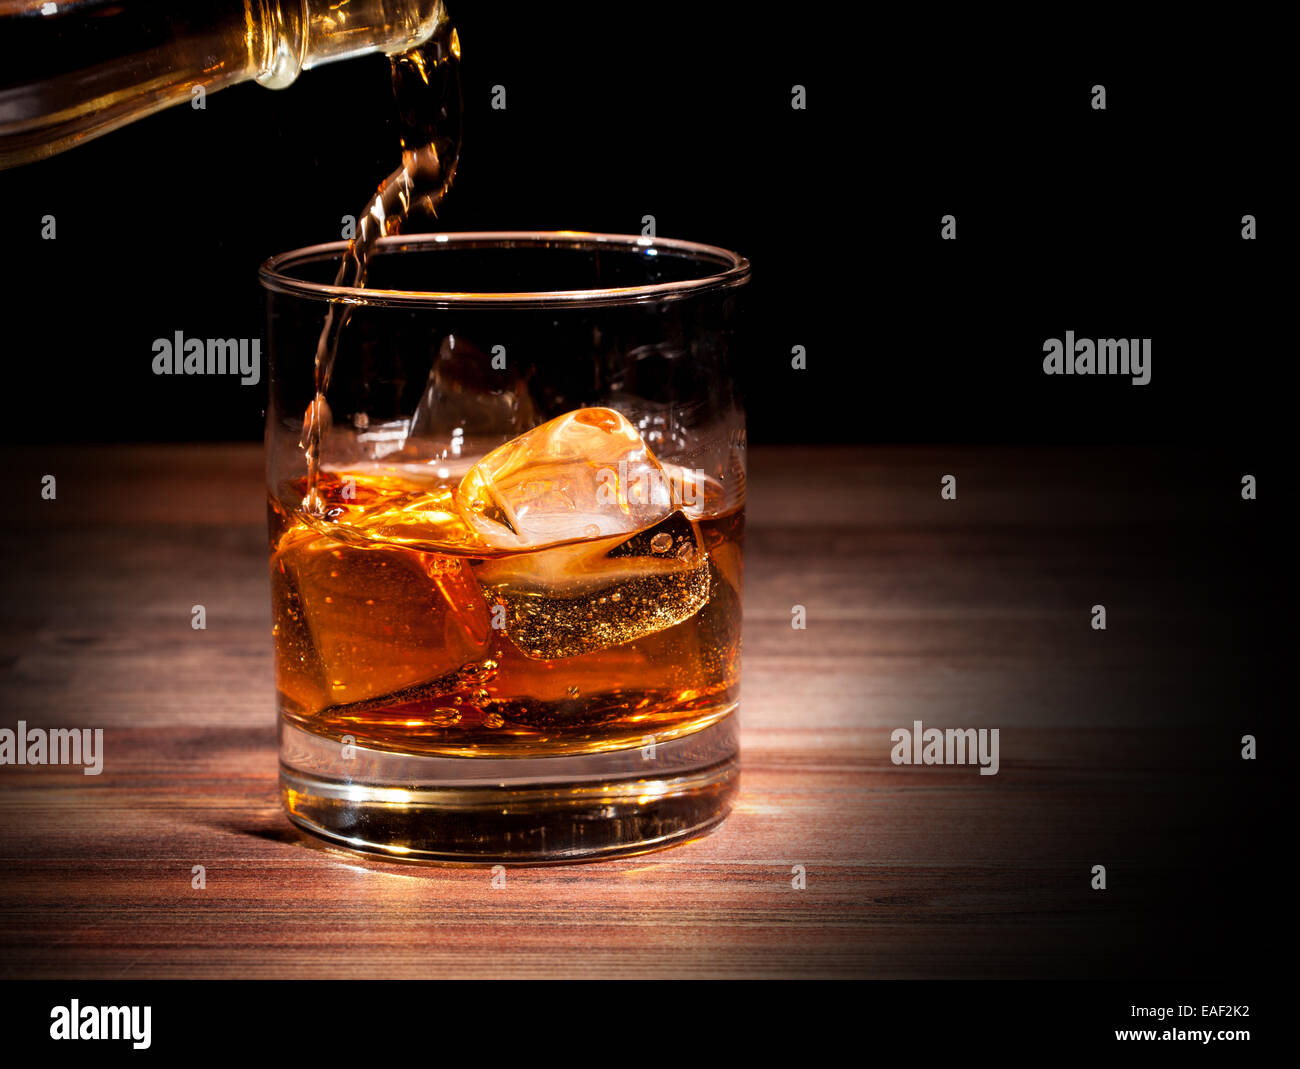 Whiskey drink on wooden table, isolated on black background Stock Photo